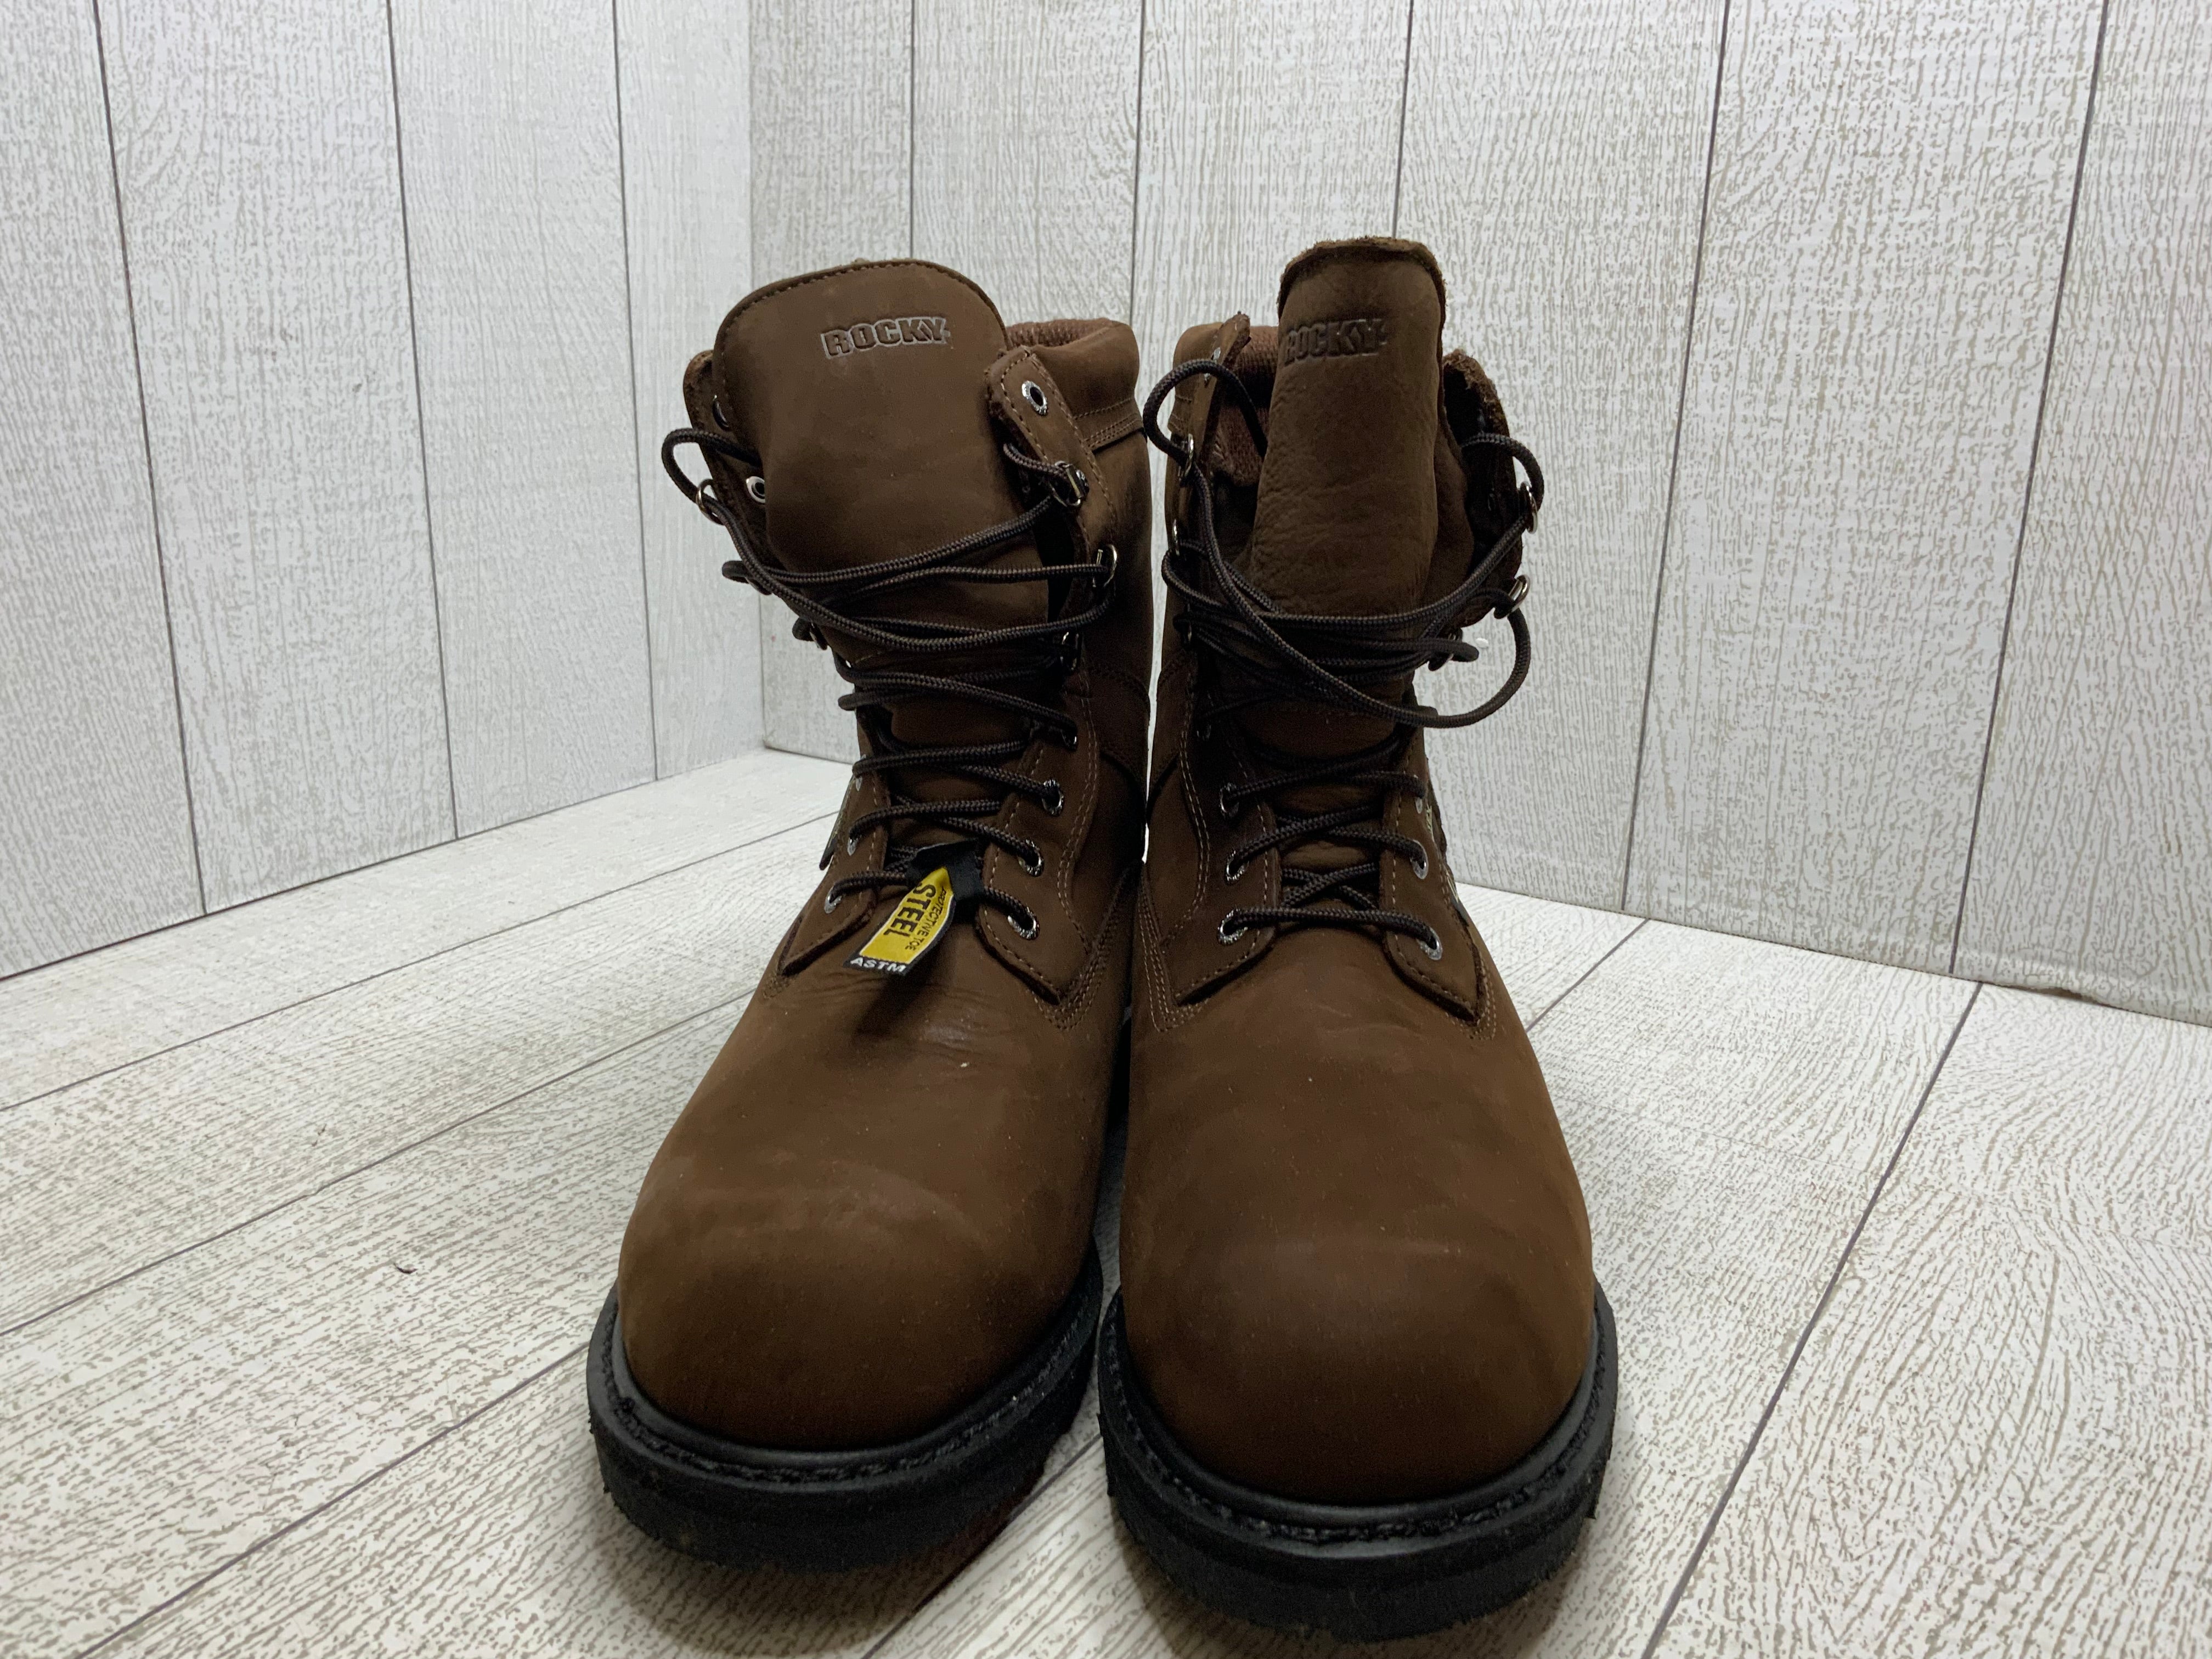 Rocky Men's Ranger Steel Toe Insulated GORE-TEX Boots **Size 12 Wide** (8060652028142)